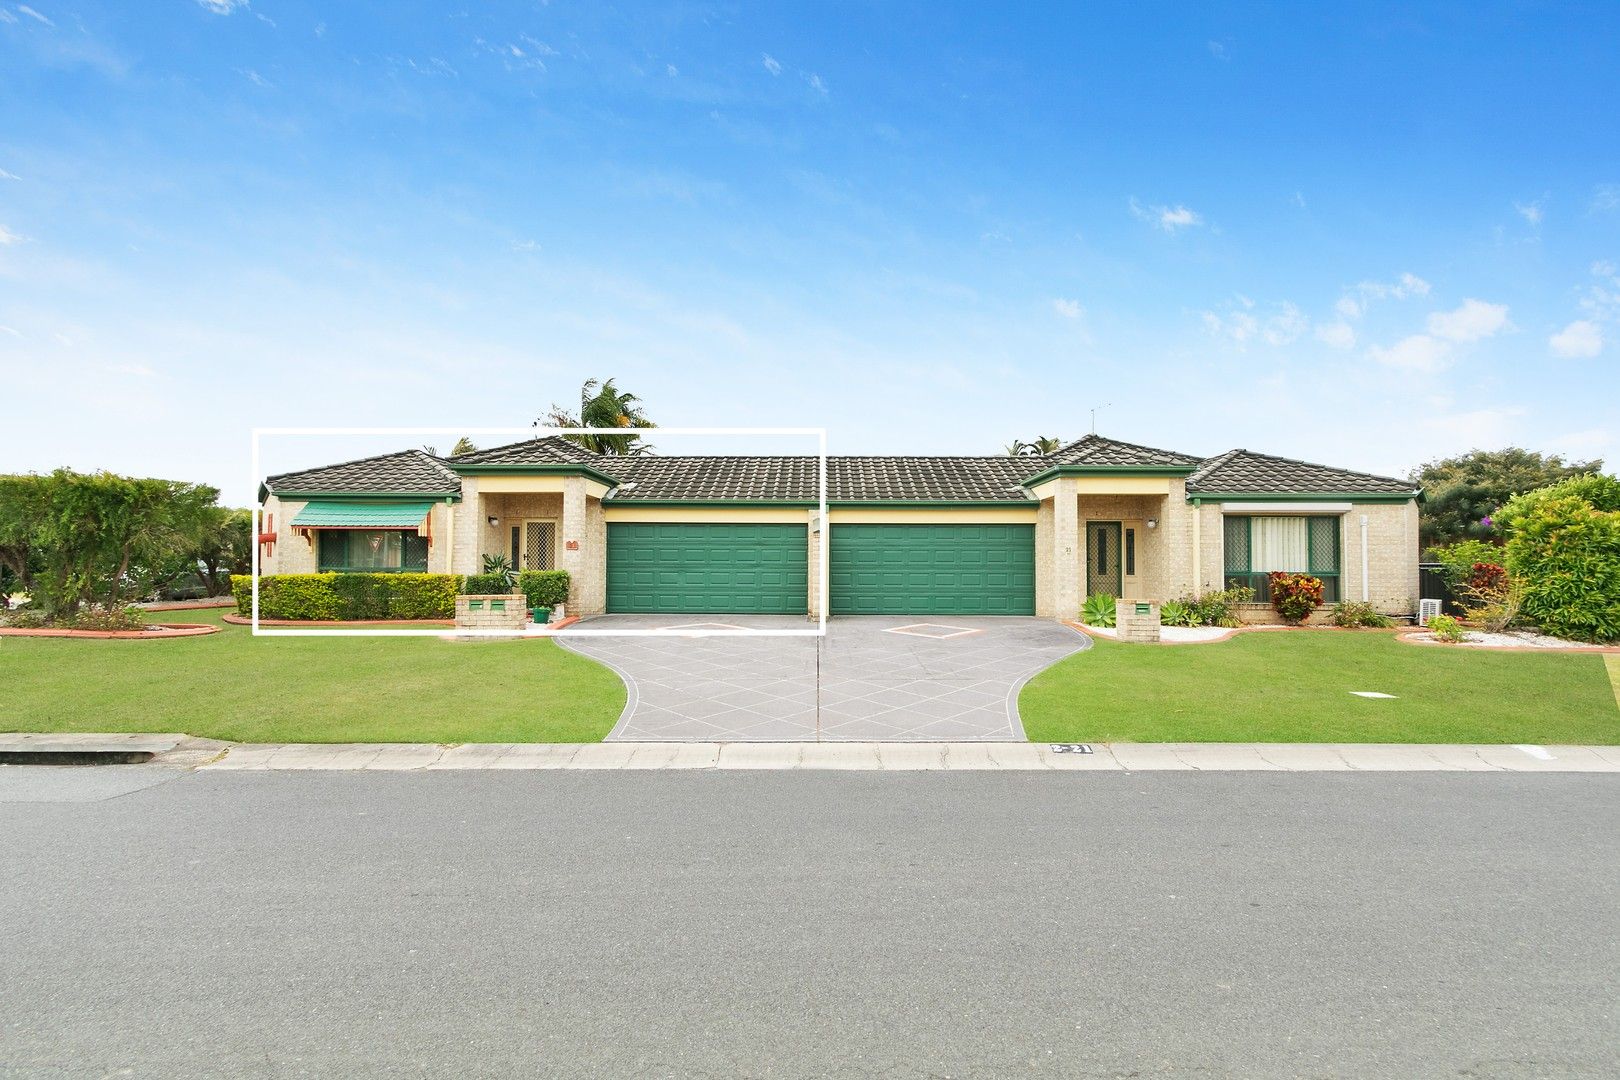 3 bedrooms Semi-Detached in 1/21 Woodlands Drive BANORA POINT NSW, 2486